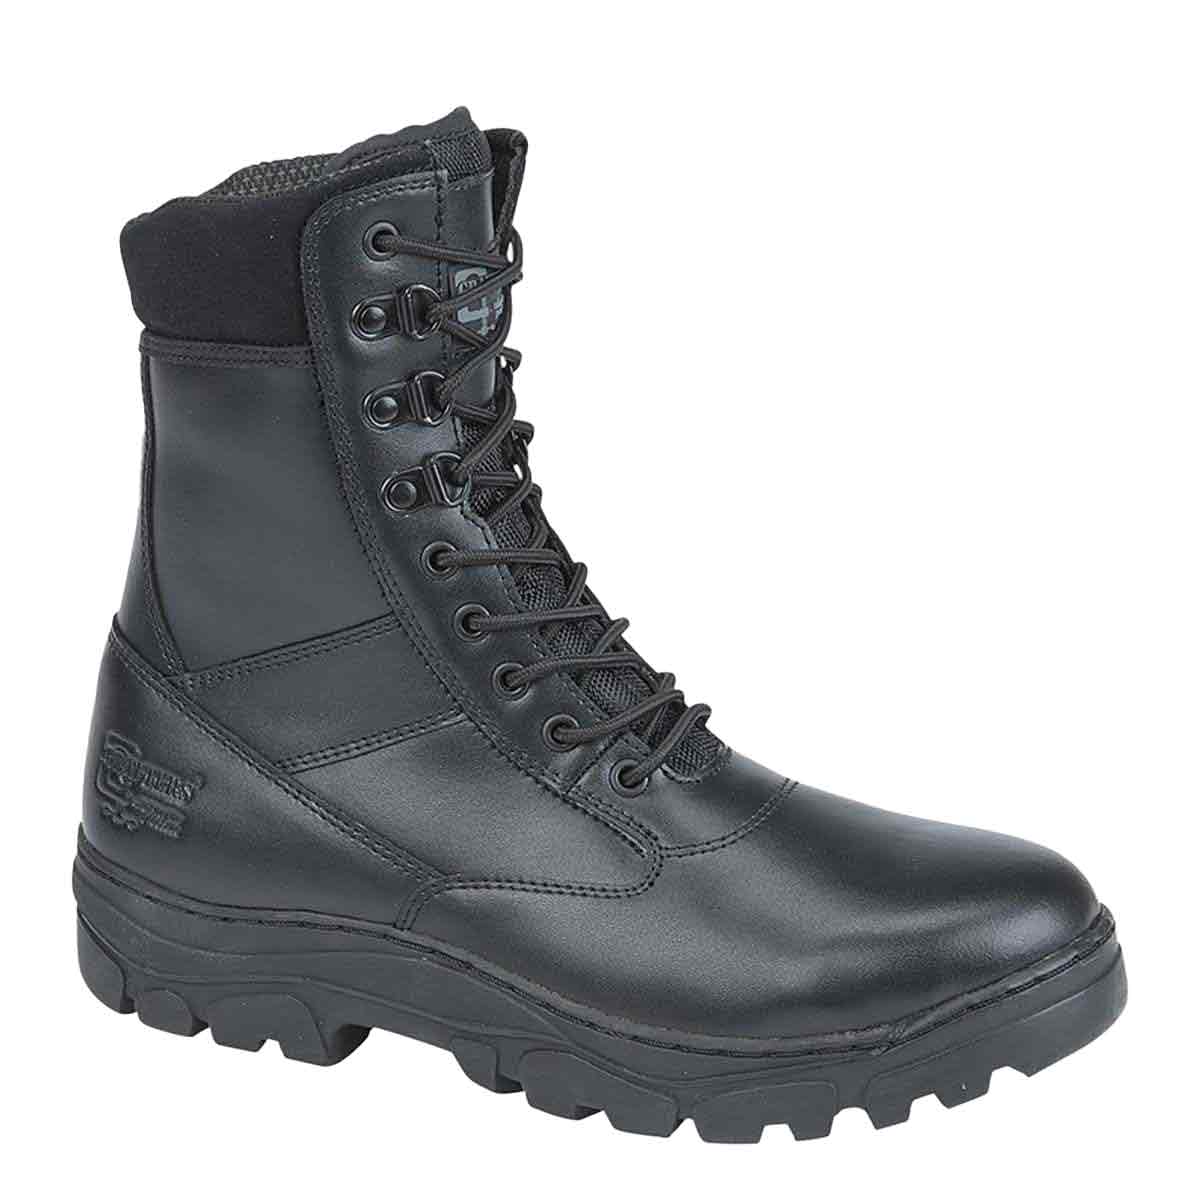 Grafters Maverick 8" Leather Thermal Police Boot - John Bull Clothing